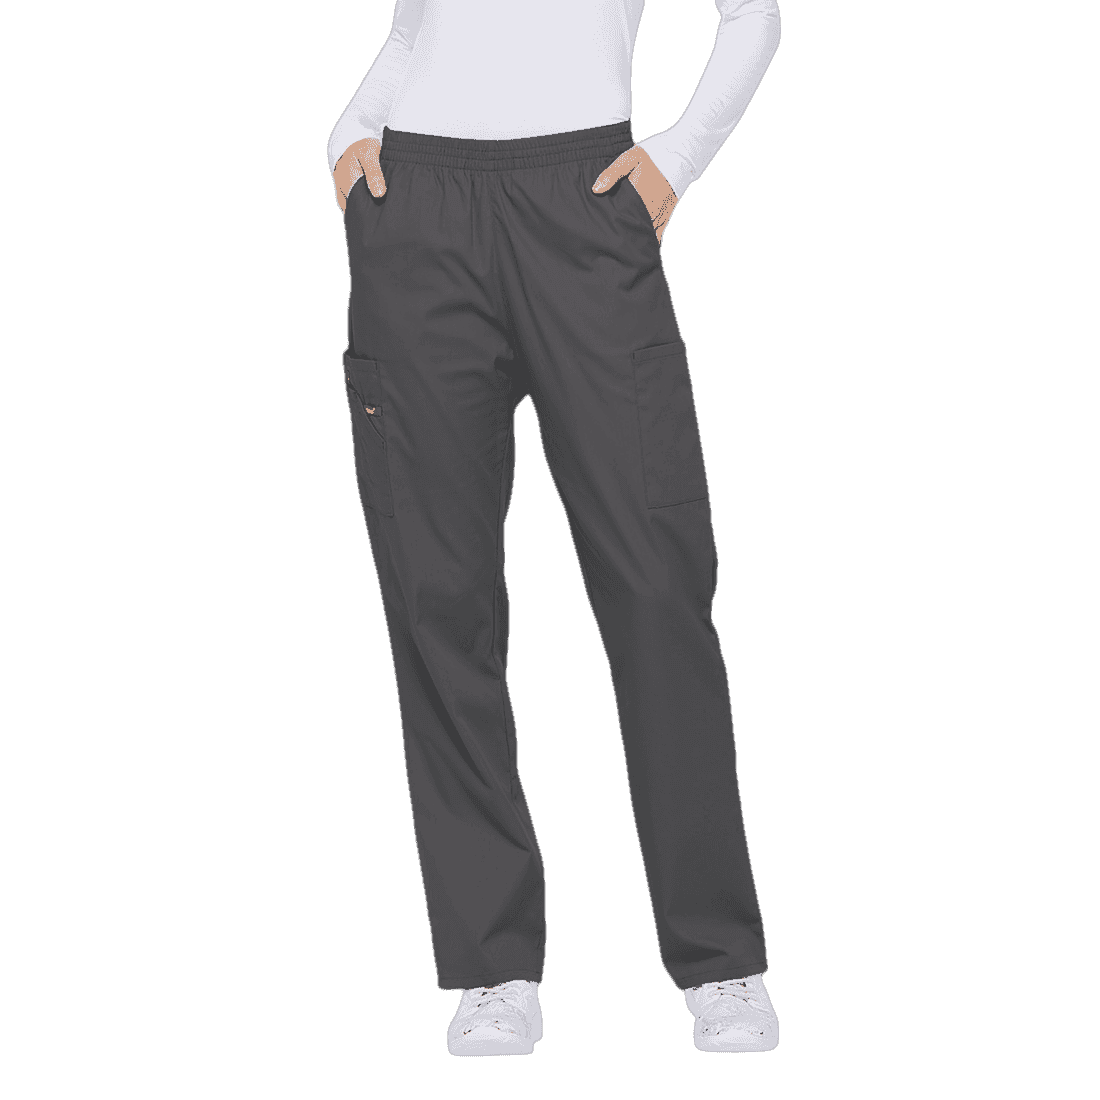 Women's Natural Rise Pull-On Scrub Trousers 86106 Pewter